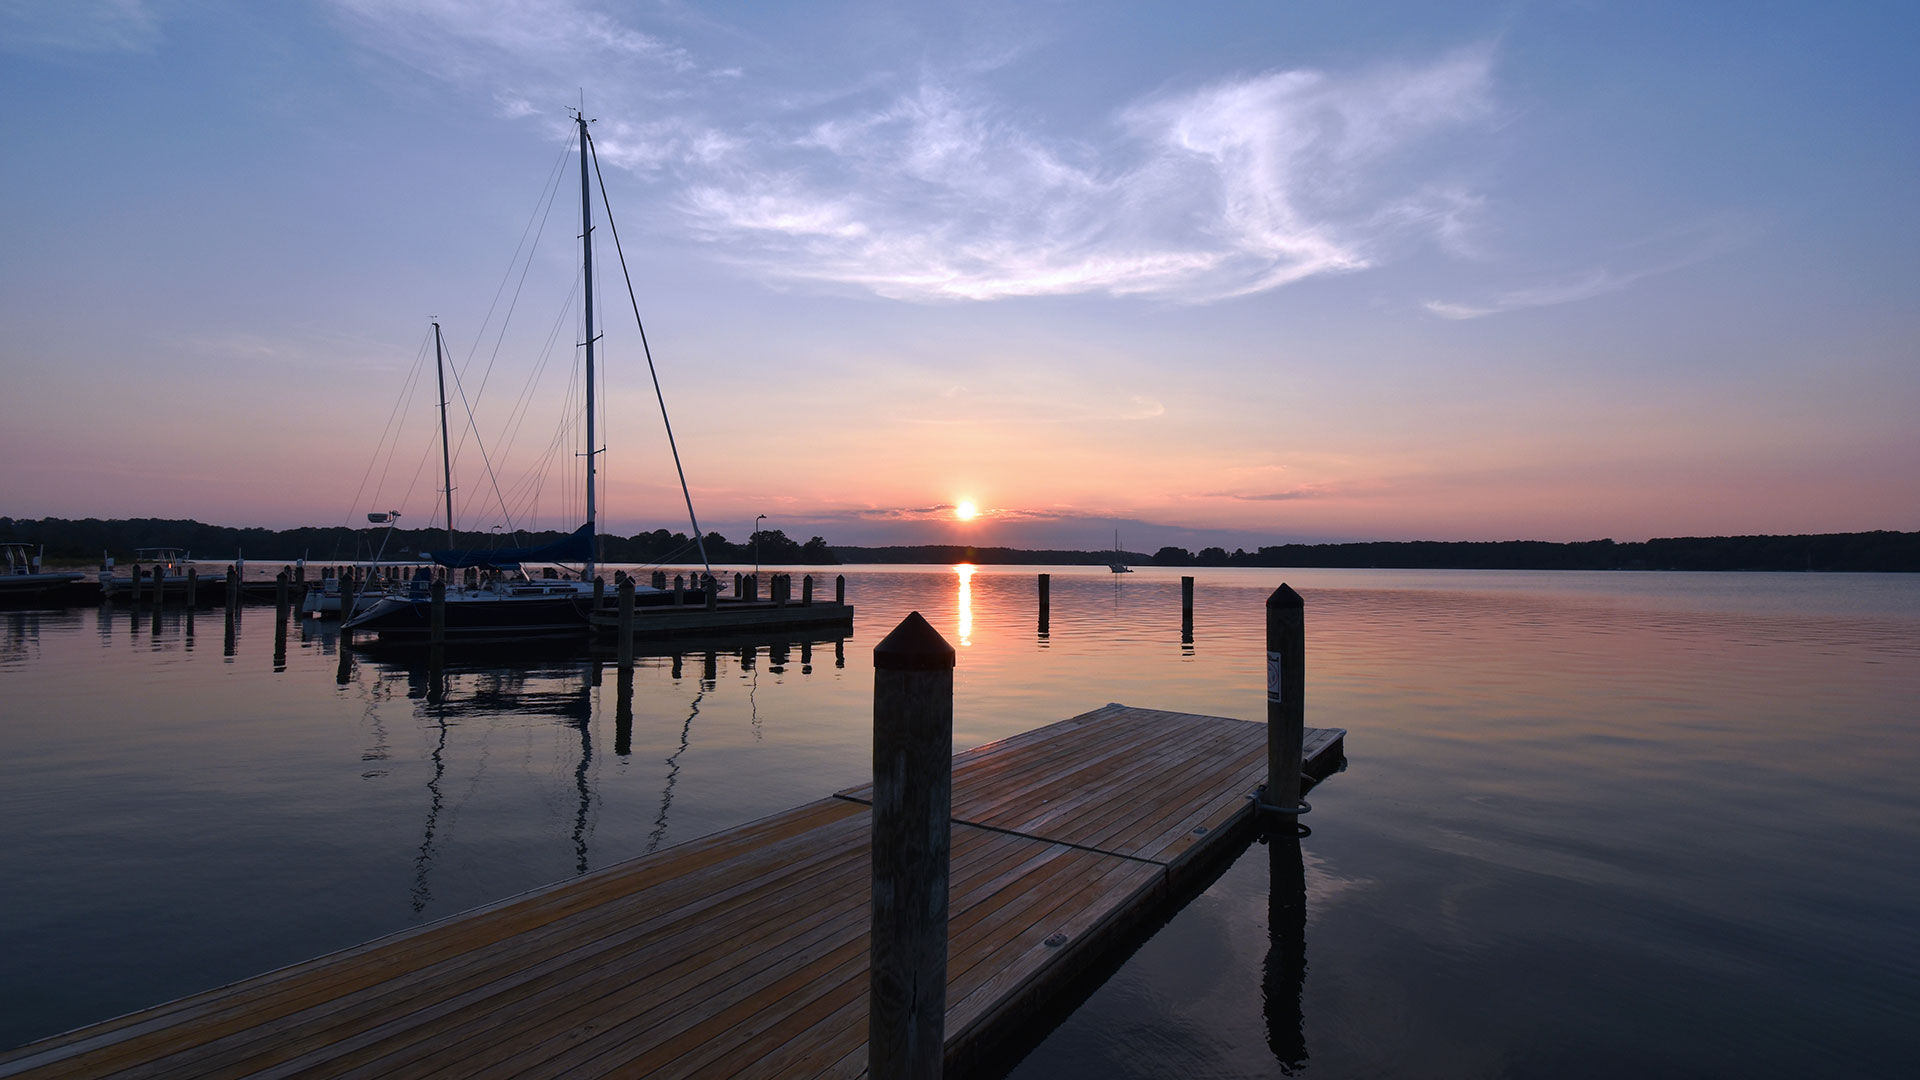 Sunset on a calm St. Mary's River, view from the docks